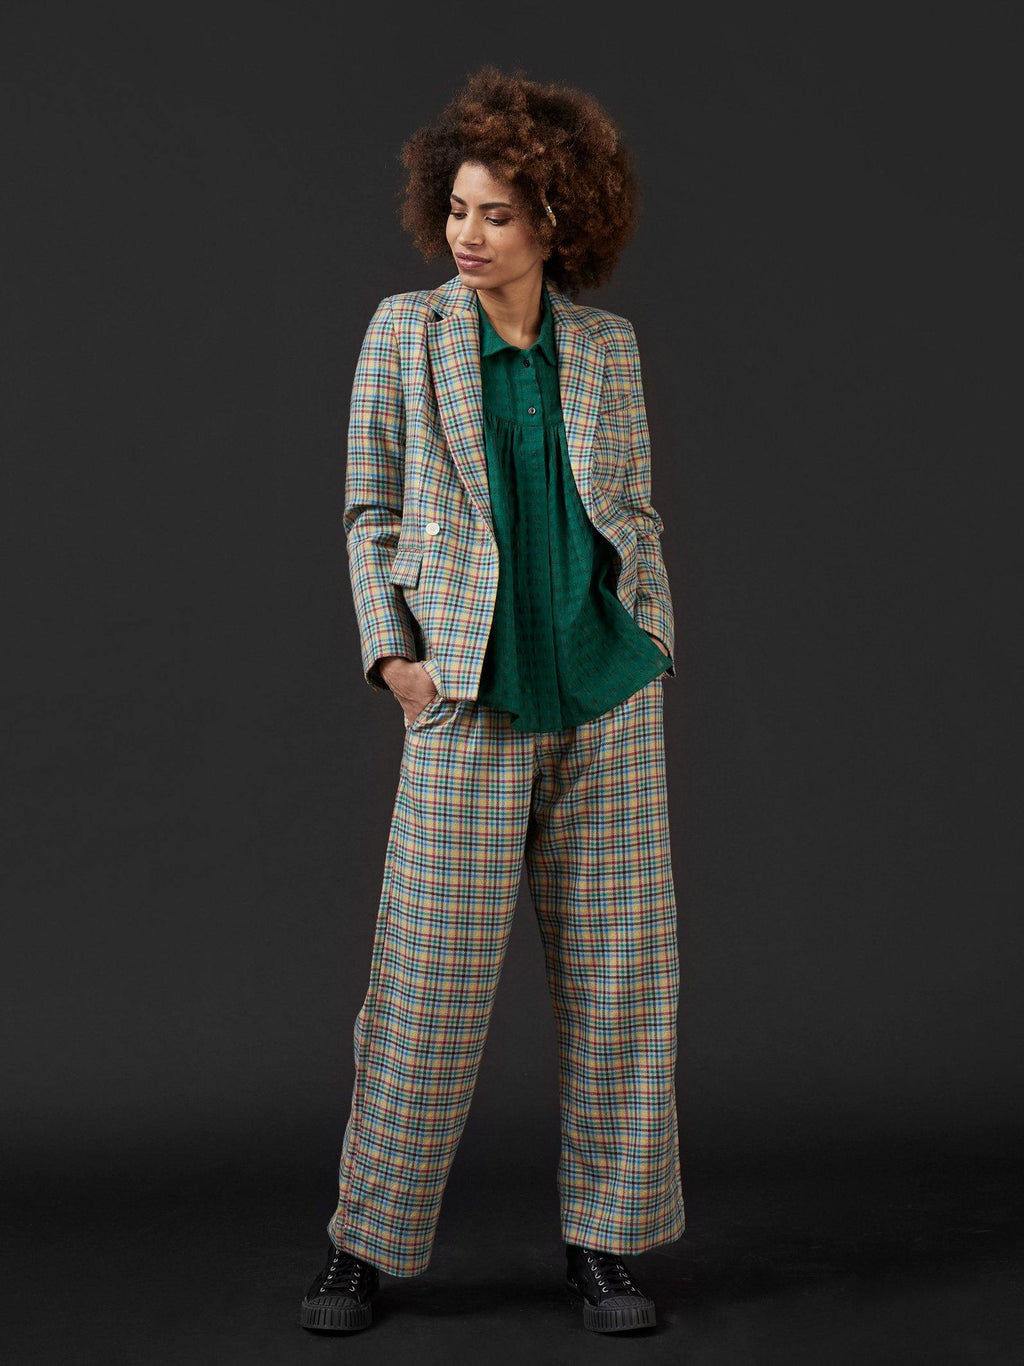 Straight-cut houndstooth pants